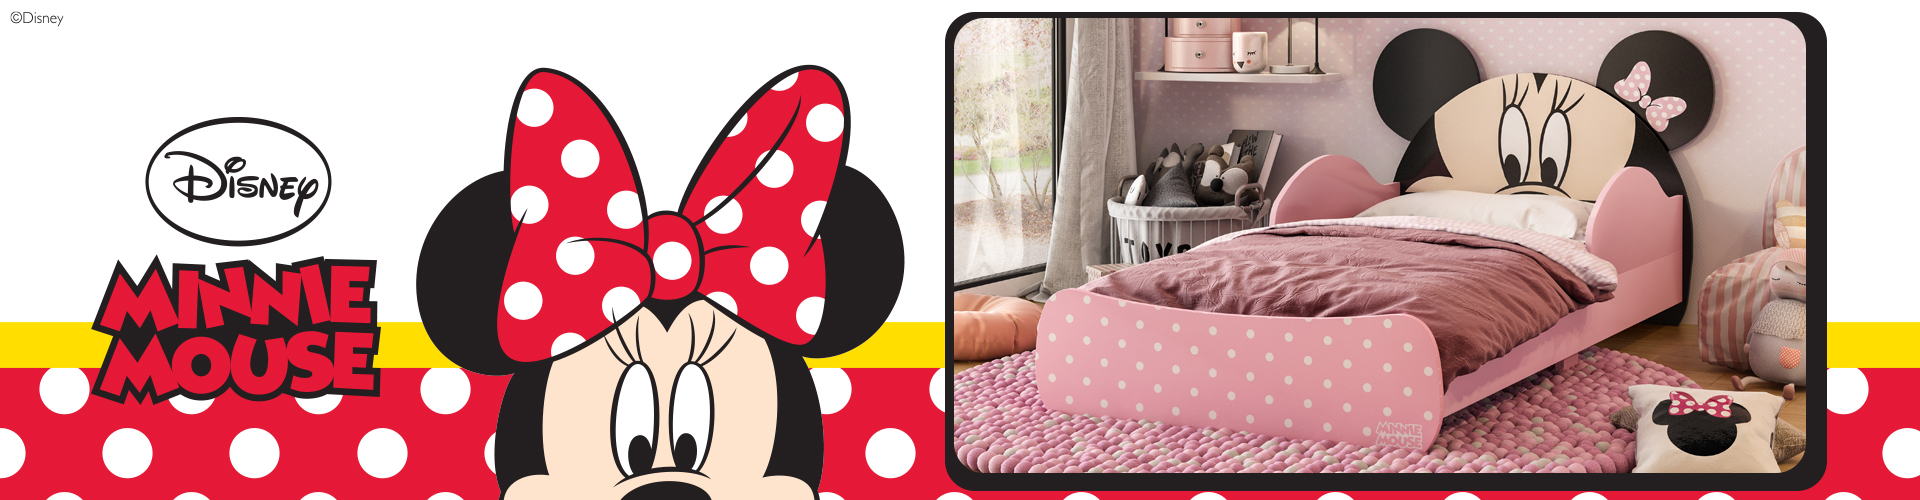 banner_personagens_minnie_mickey-play